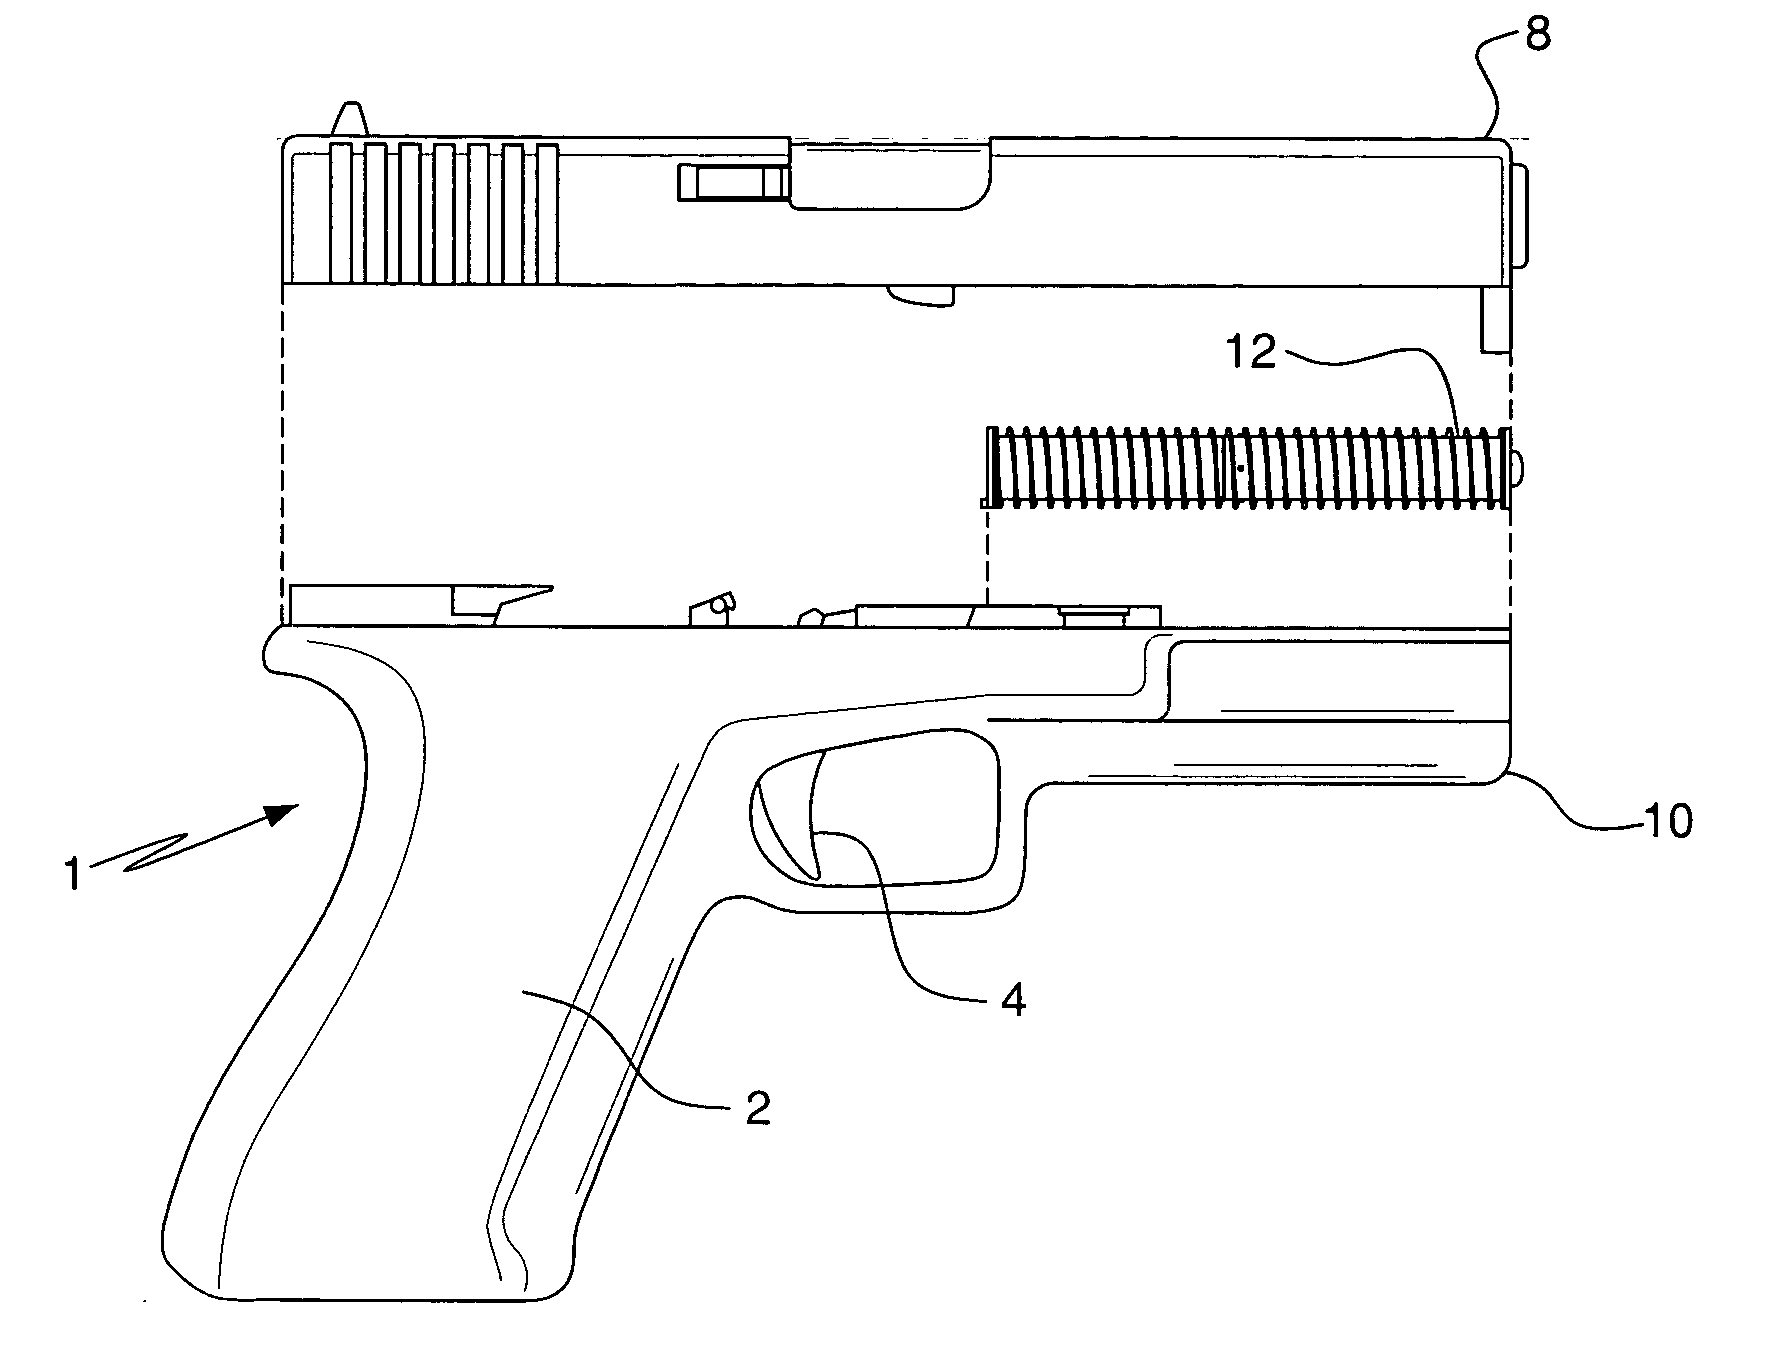 Camera integrated firearm system and method